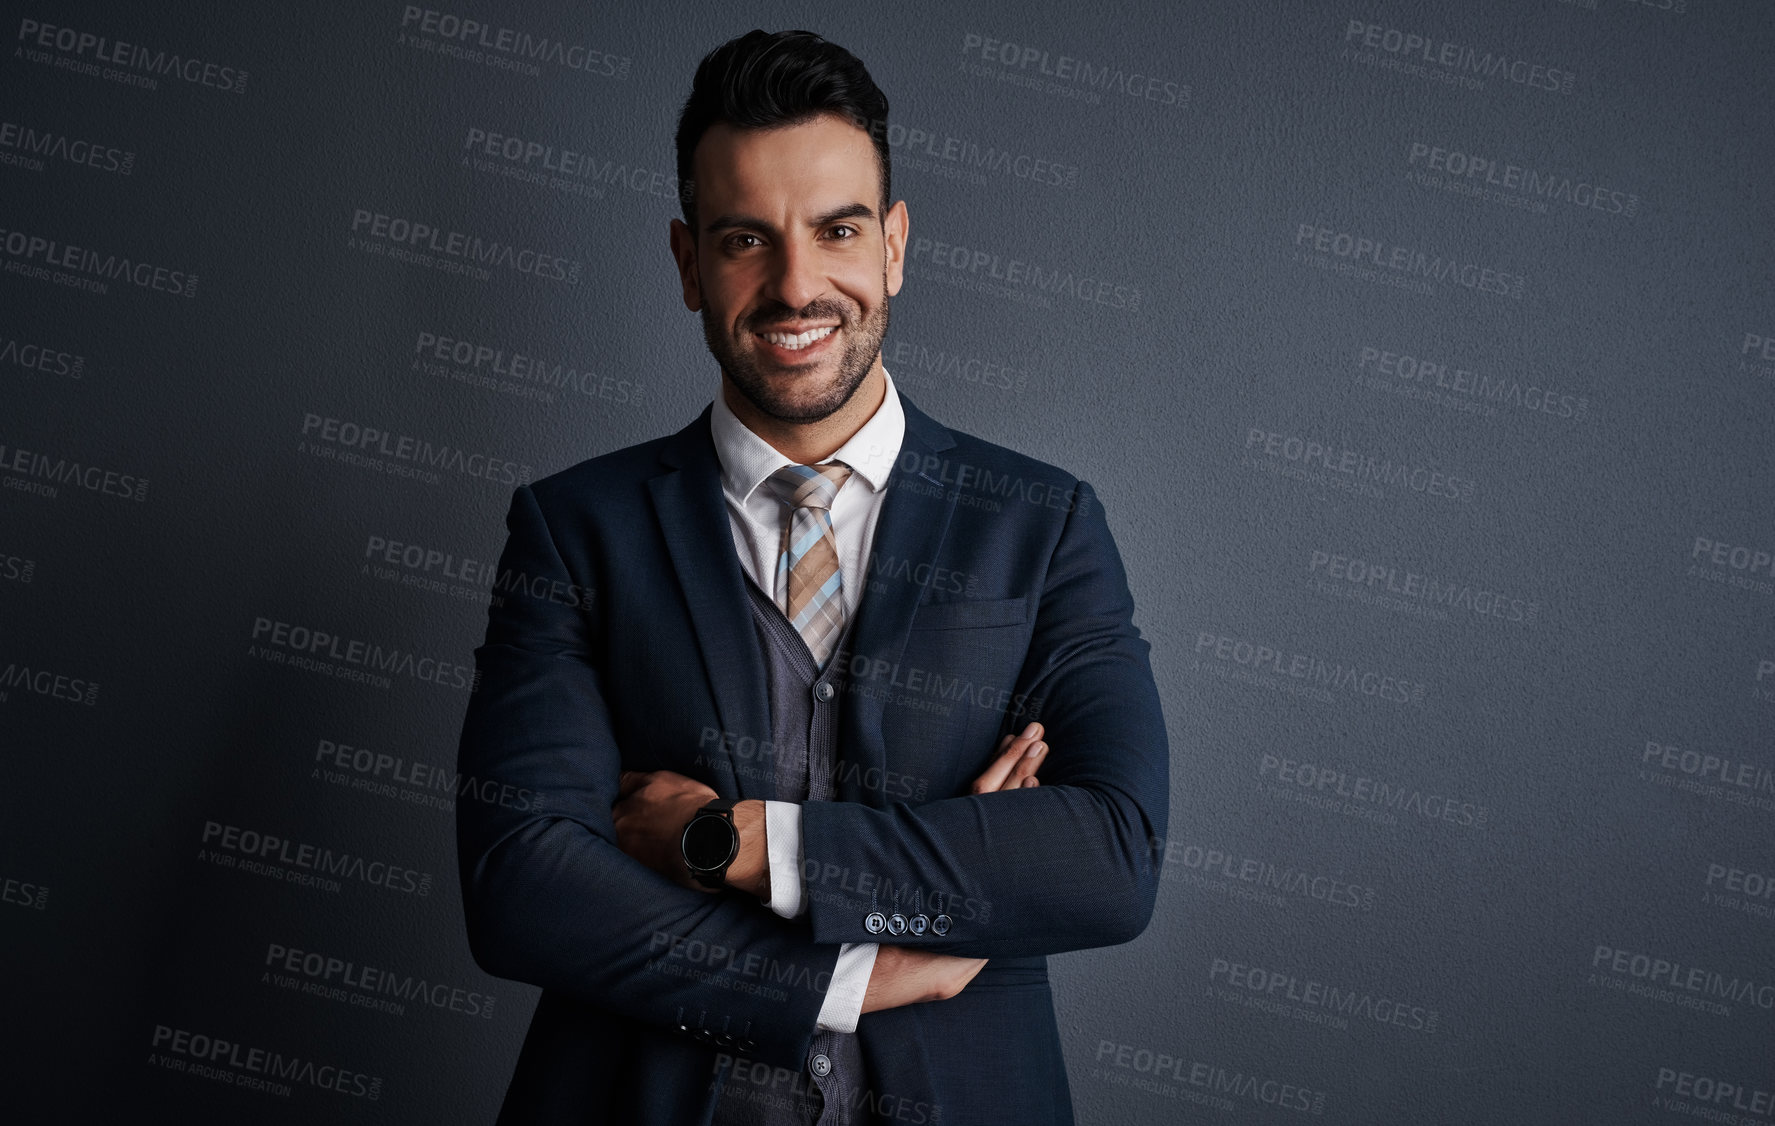 Buy stock photo Studio shot of a stylish and confident young businessman posing against a gray background